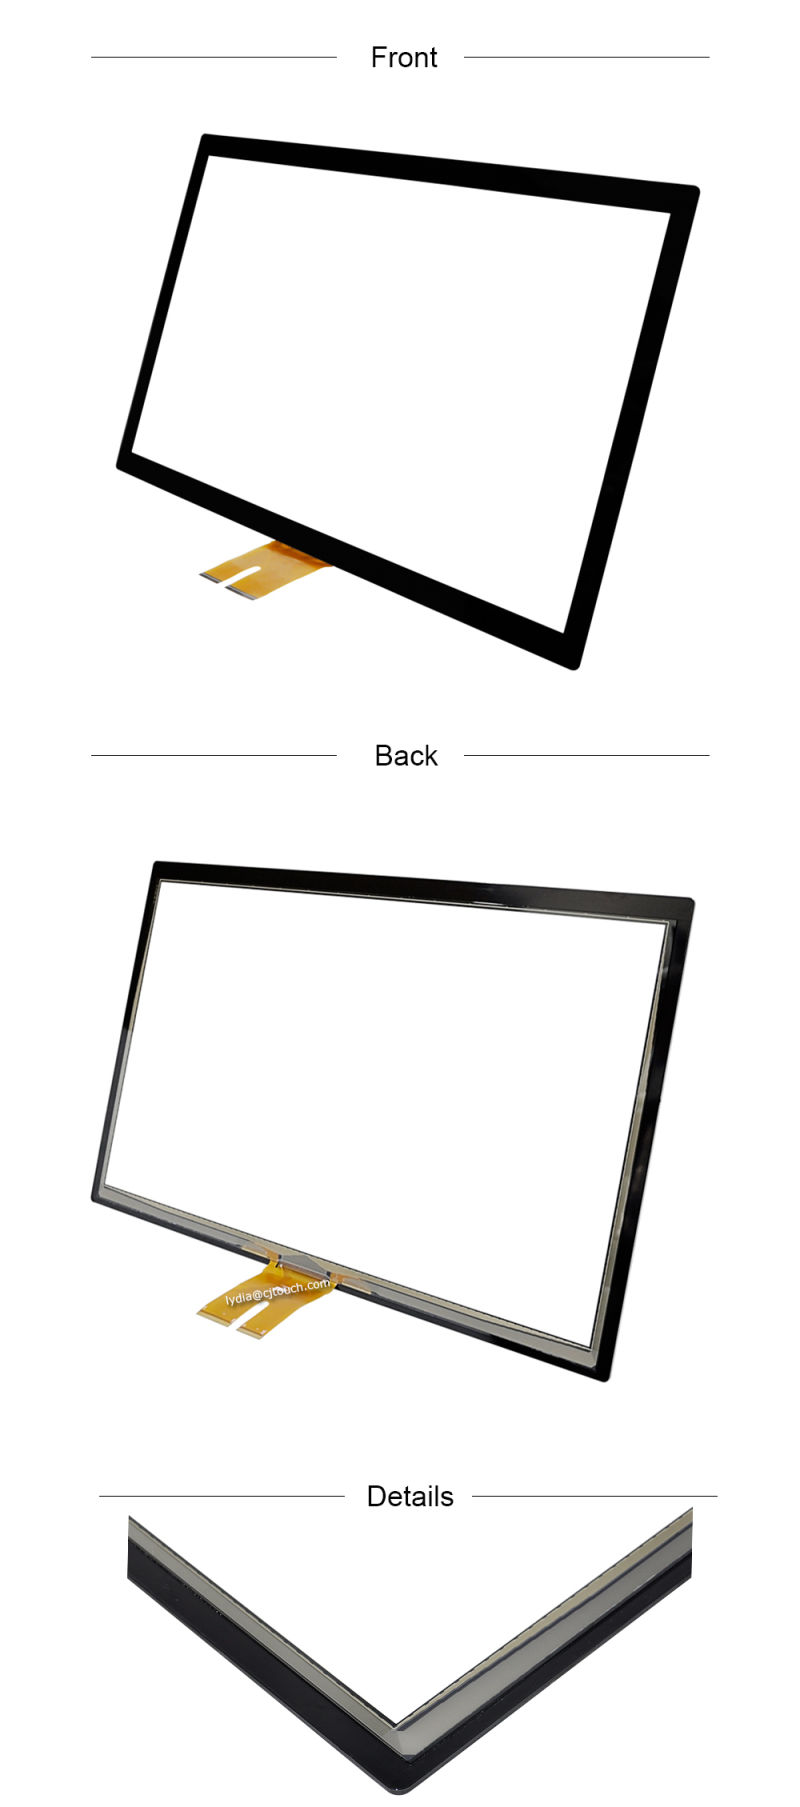 Cjtouch 27 Inch Capacitive Touch Screen Panel/Pcap Touch Screen/Large Touch Screen Panel